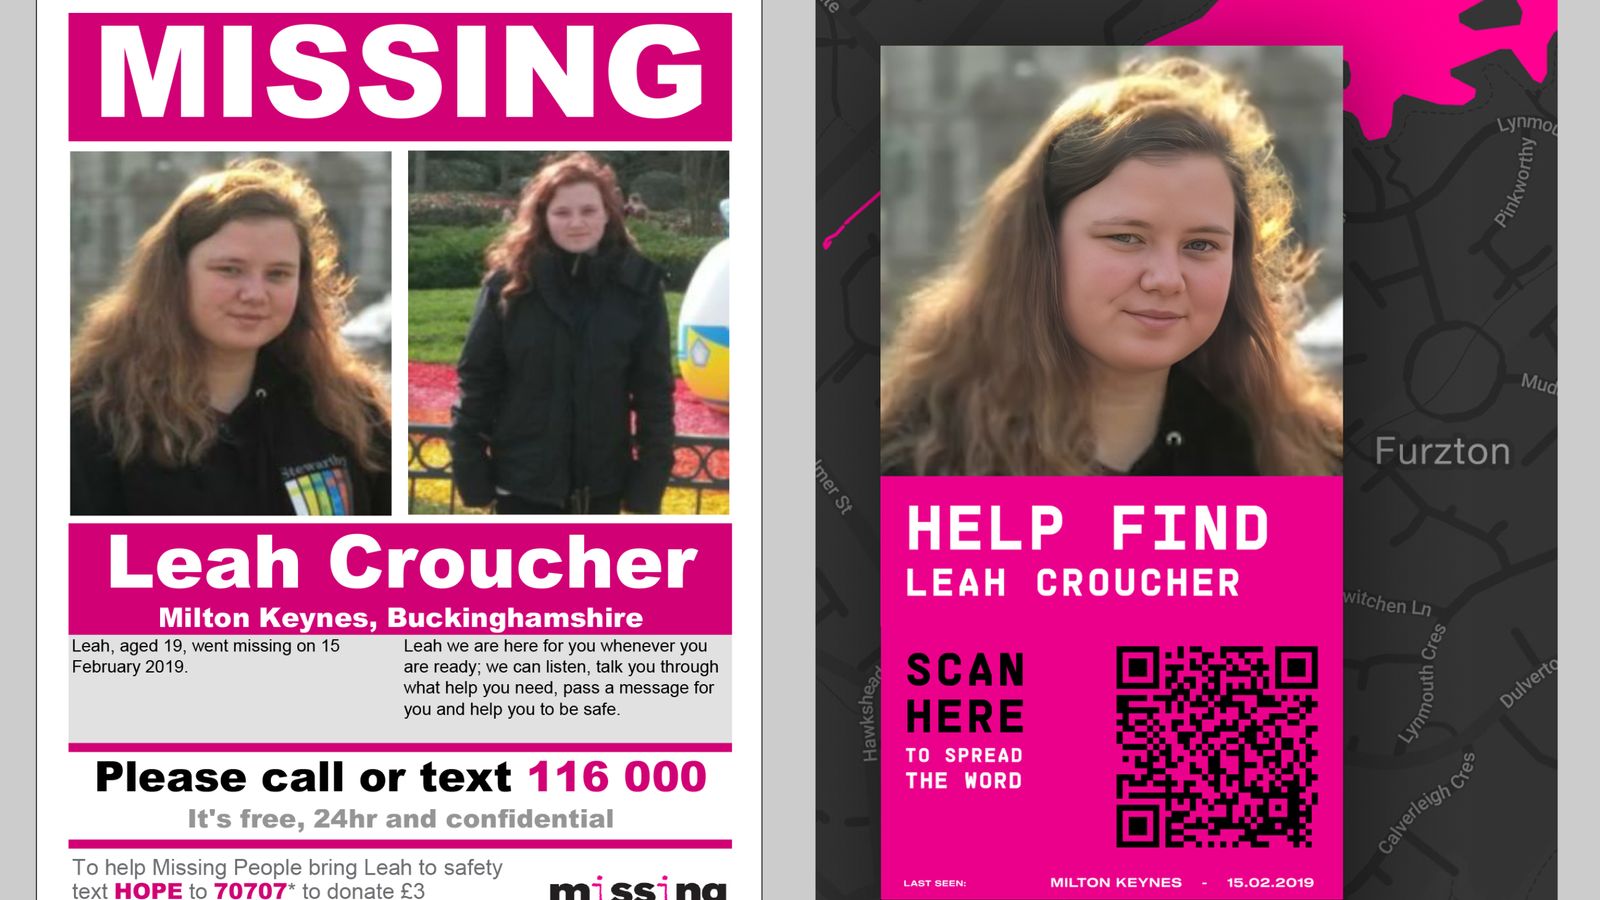 Missing person posters redesigned for more impact and will no longer have word 'missing'